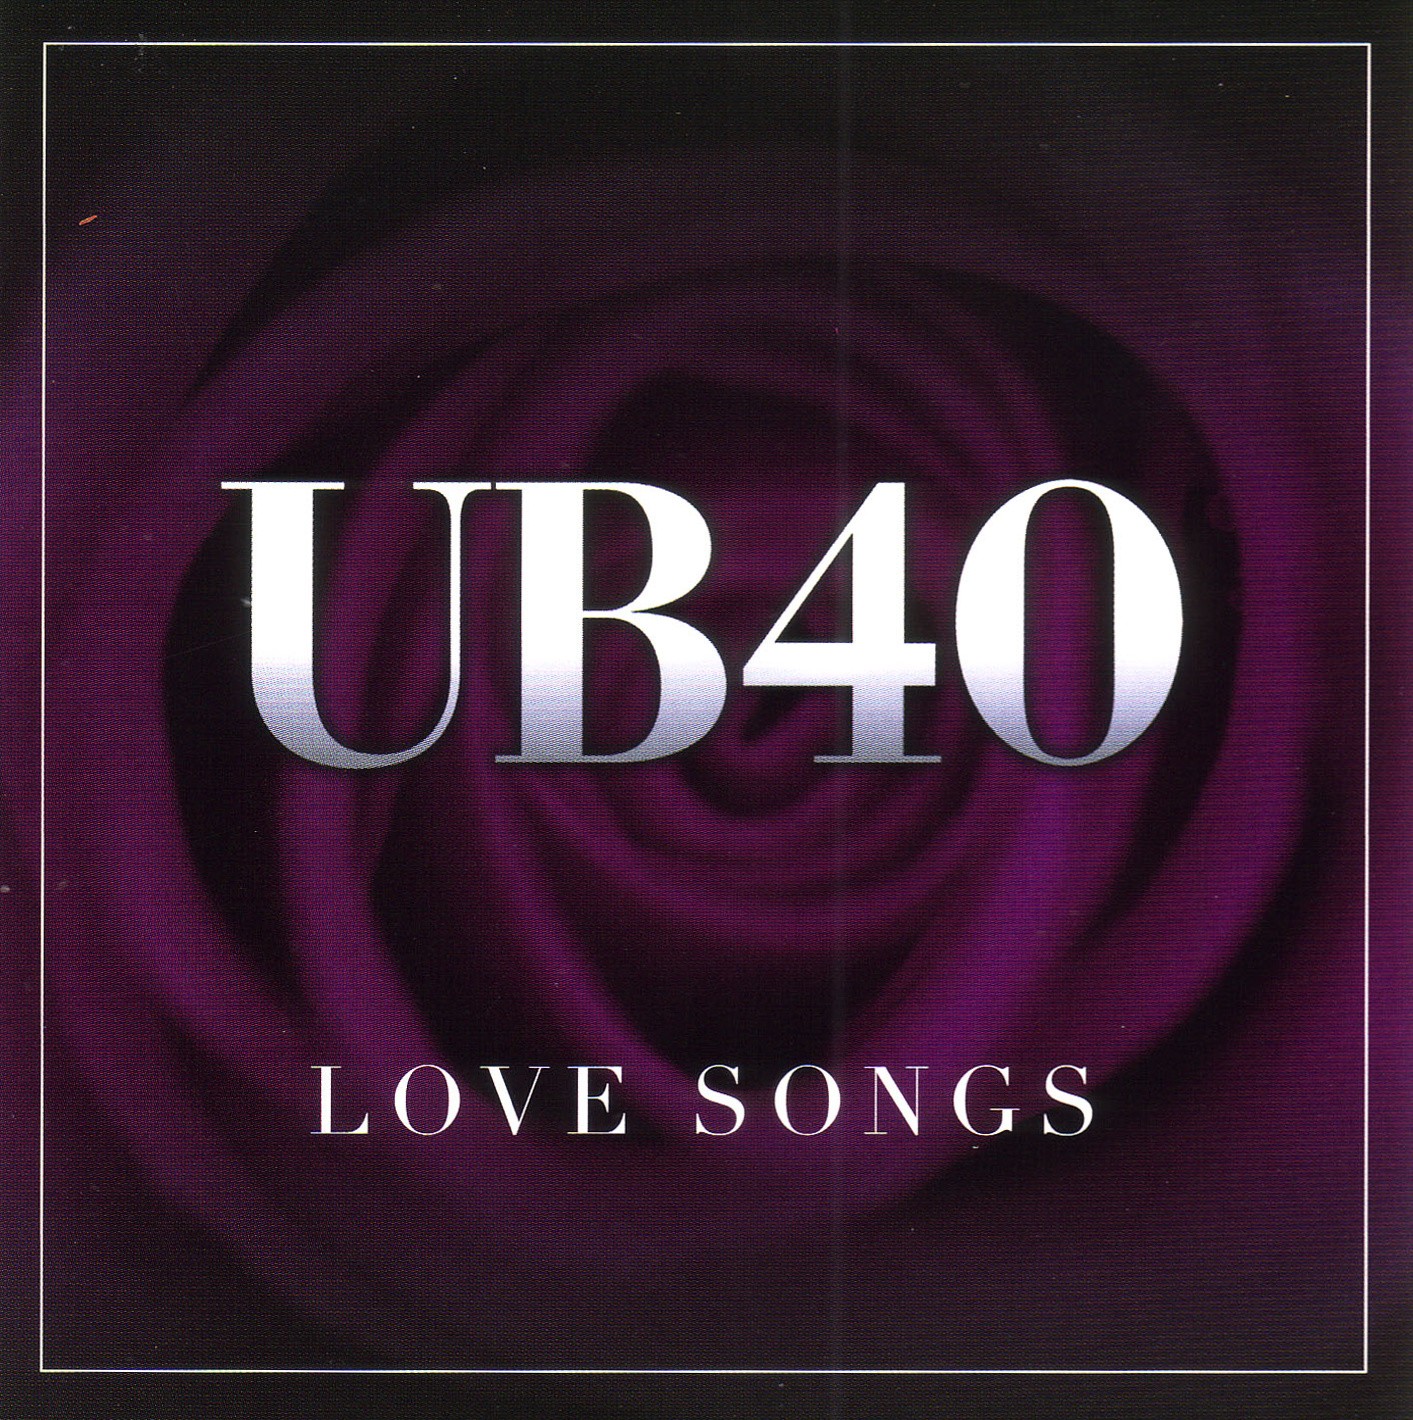 Лов 40. Ub40 альбомы. Ub40: Greatest Hits. Forty Love. Ub40 - (i can't help) Falling in Love with you.